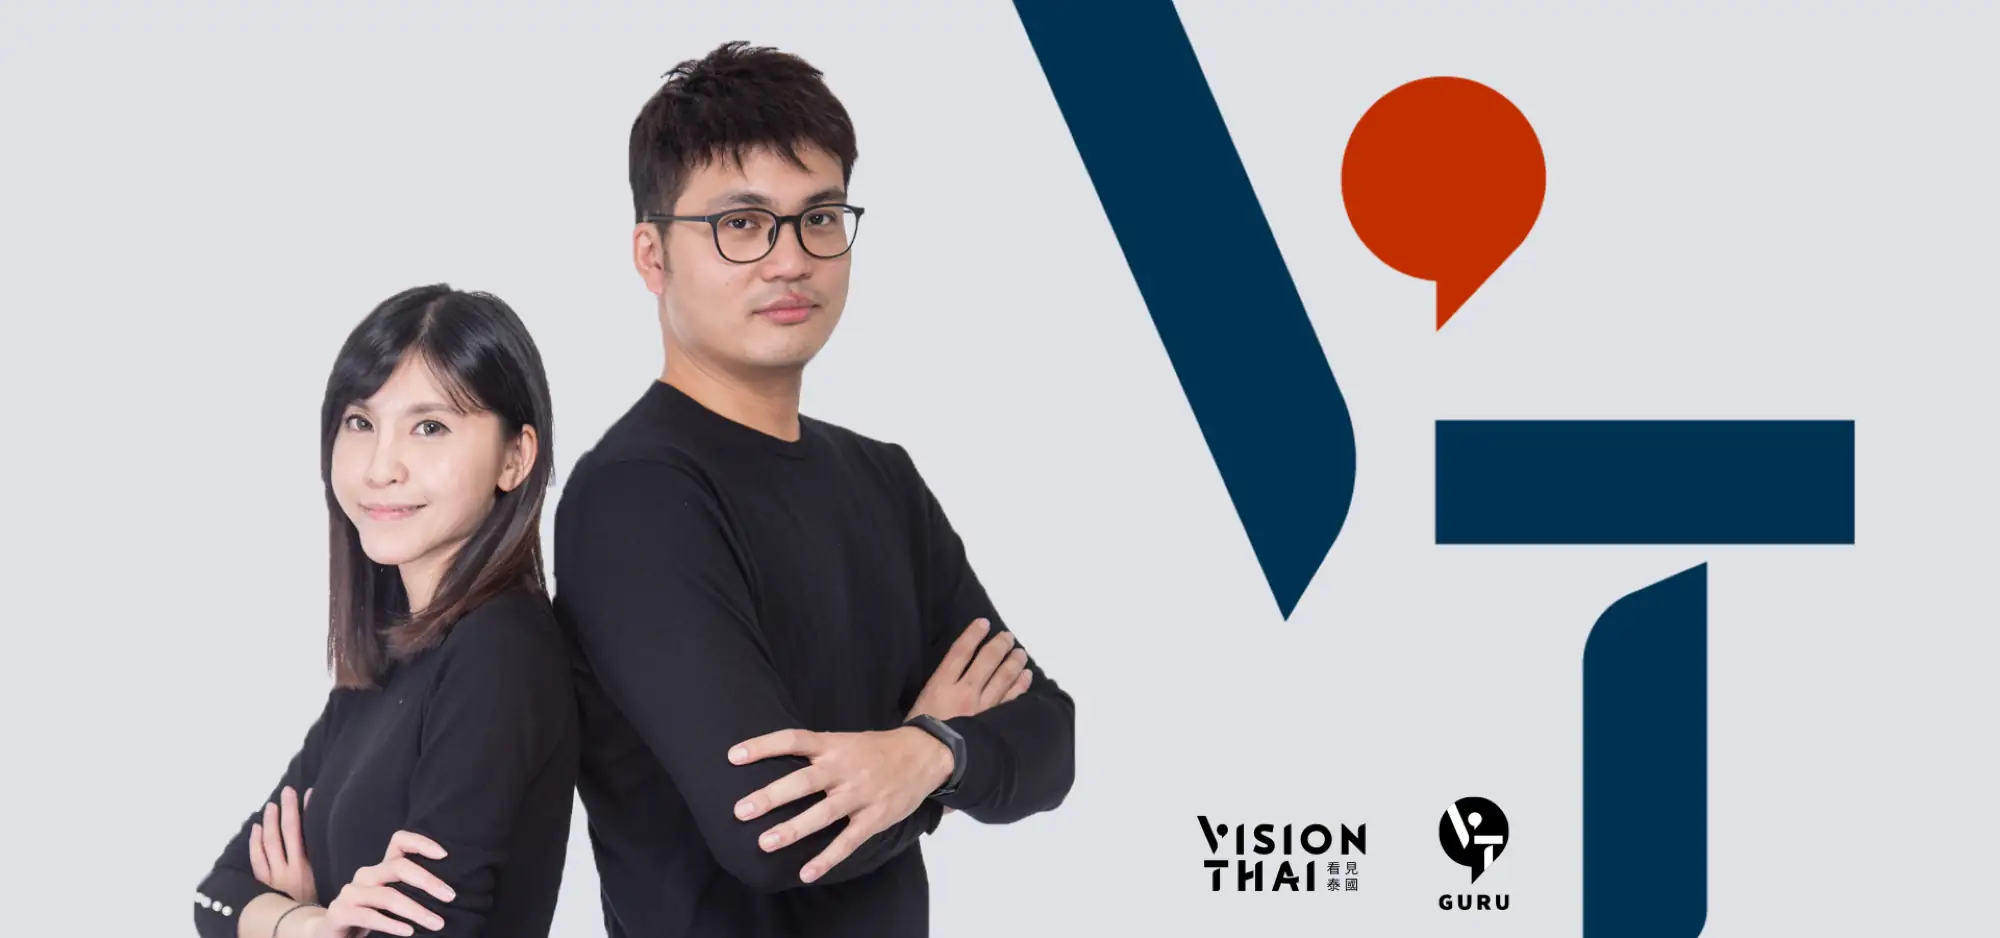 VT Group was established by 2 Taiwanese entrepreneurs: Mr. Ter Lee, and Ms. Angel Chen.